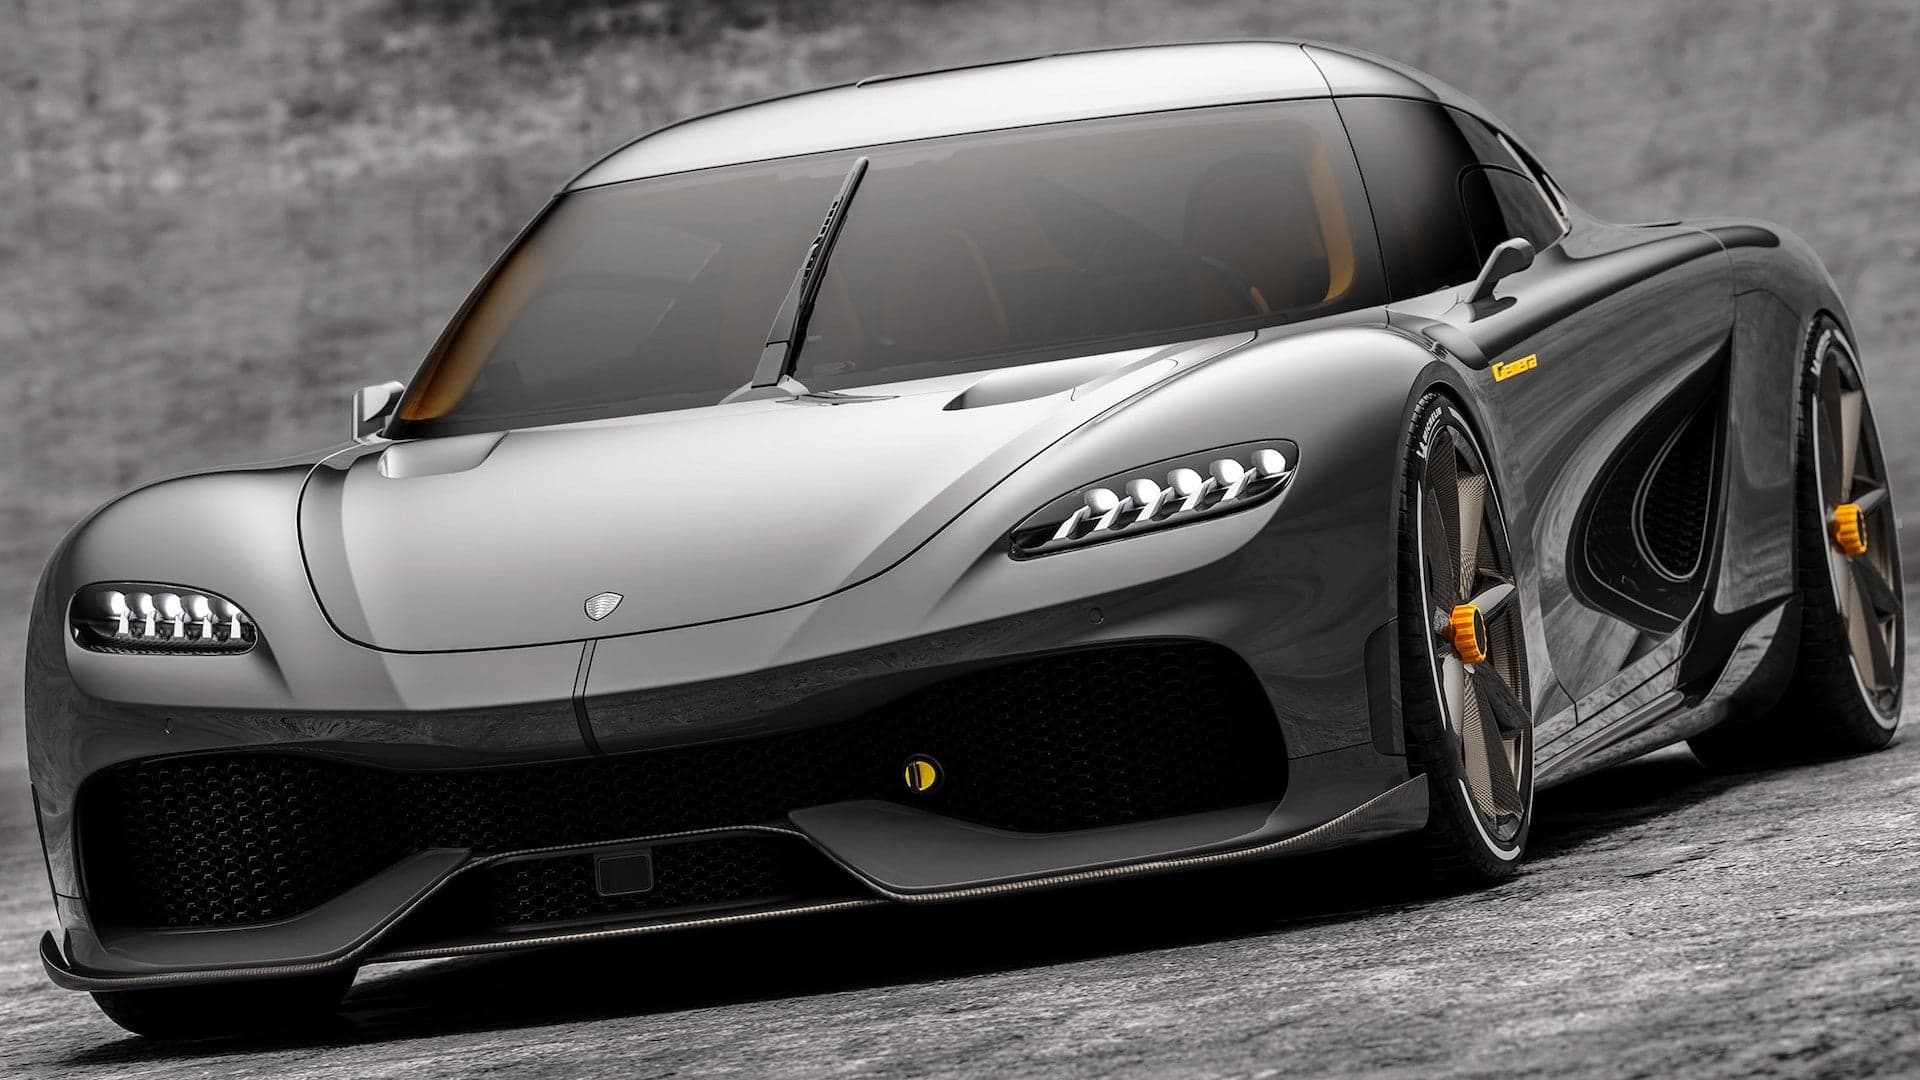 4-Seat, 3-Cylinder, Twin-Turbo Koenigsegg Gemera Does 0-60 in 1.9 Seconds